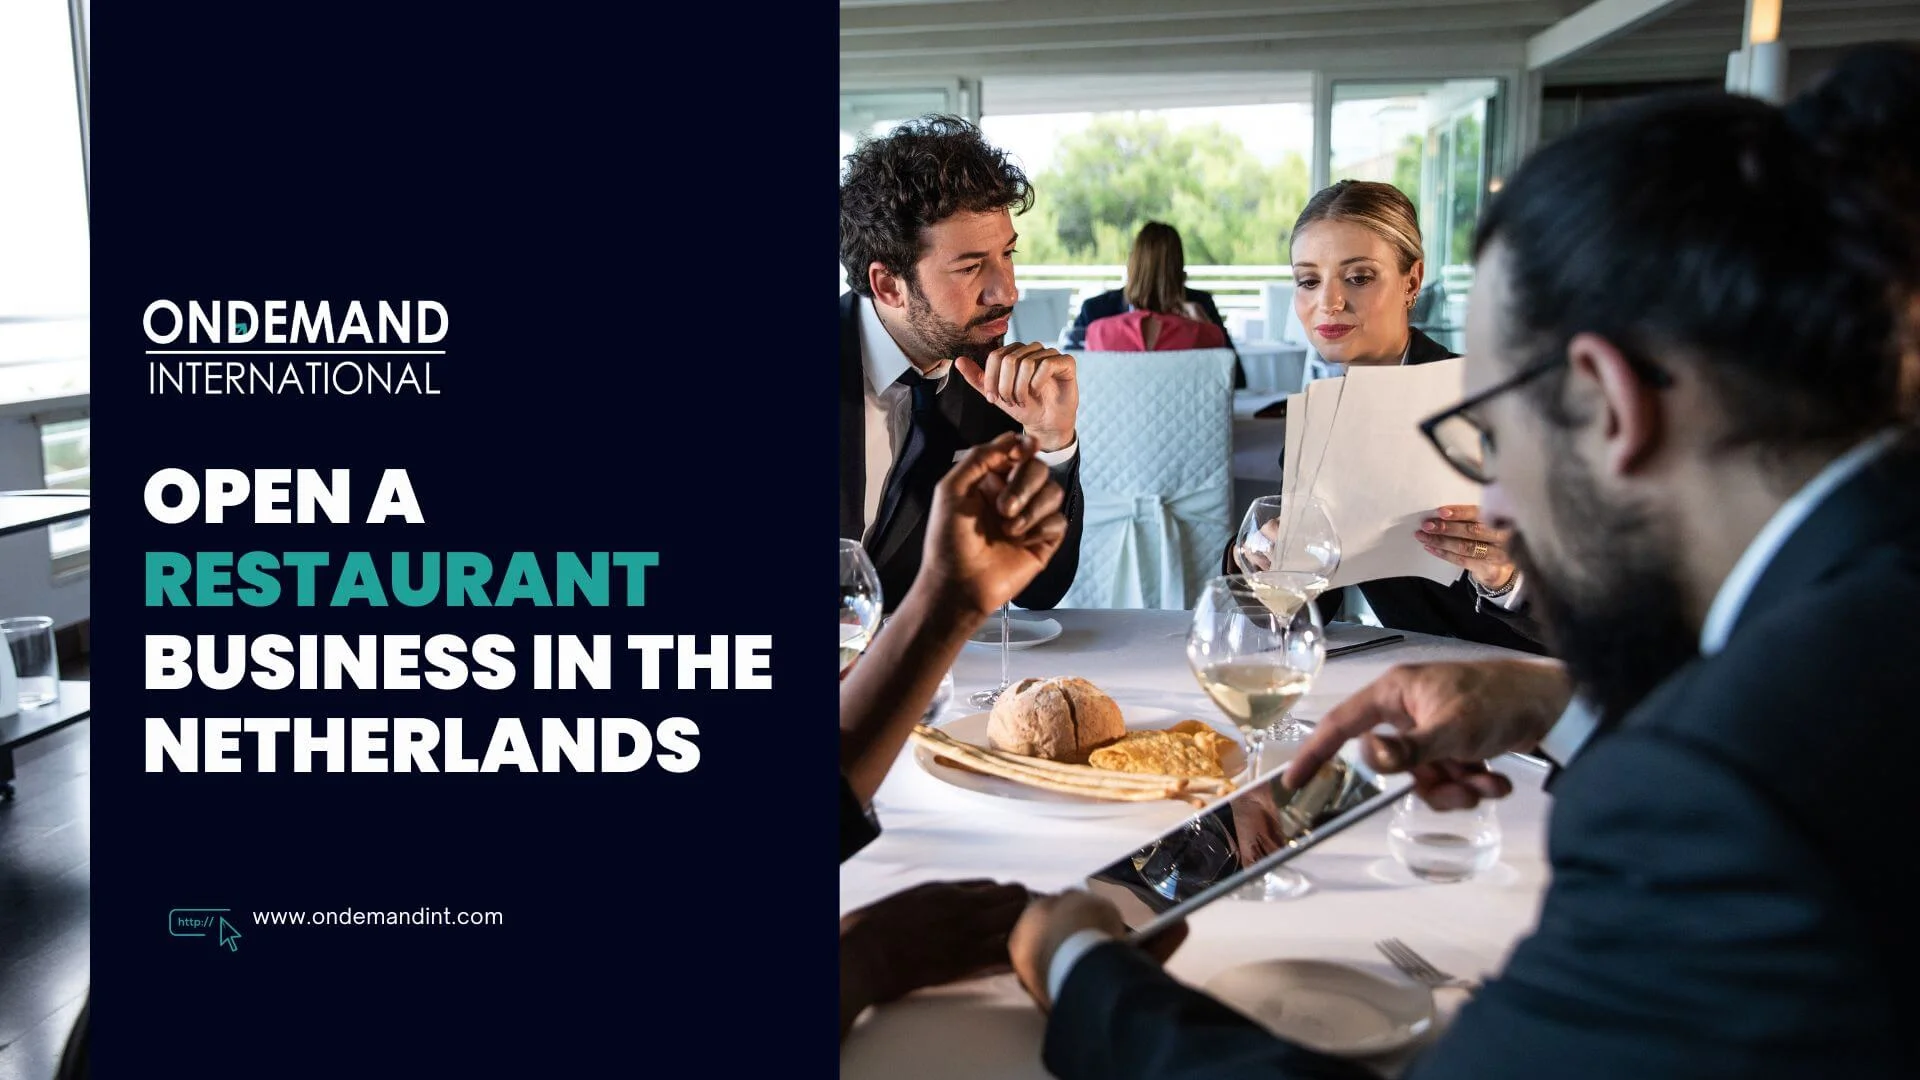 Open a Restaurant Business in the Netherlands: Requirements & Steps